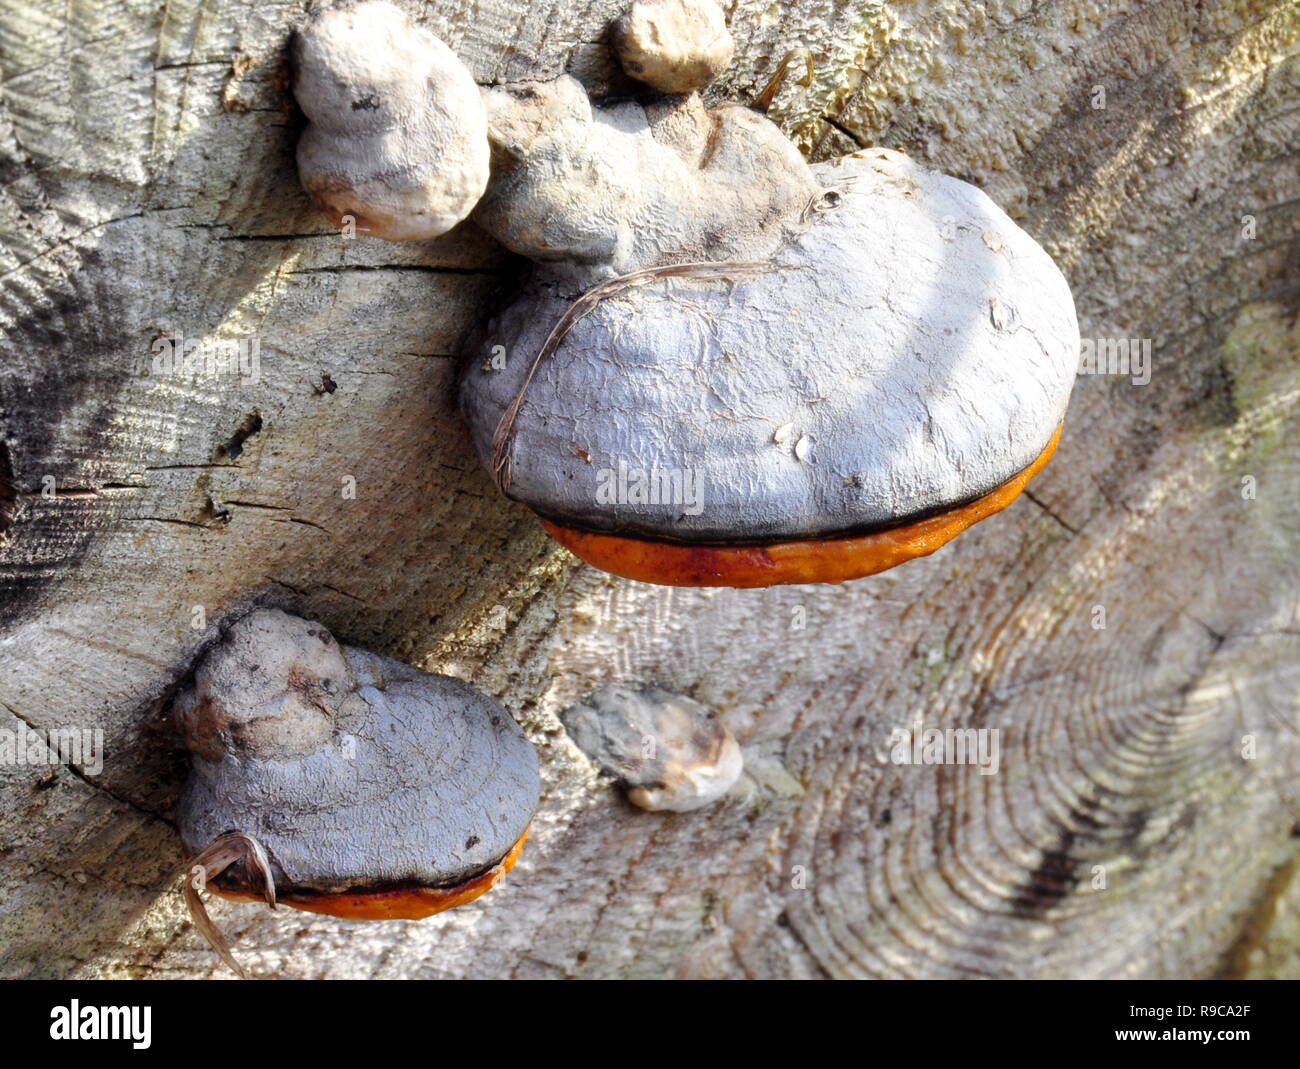 Red-belt conk Fomitopsis pinicola growing on a trunk Stock Photo